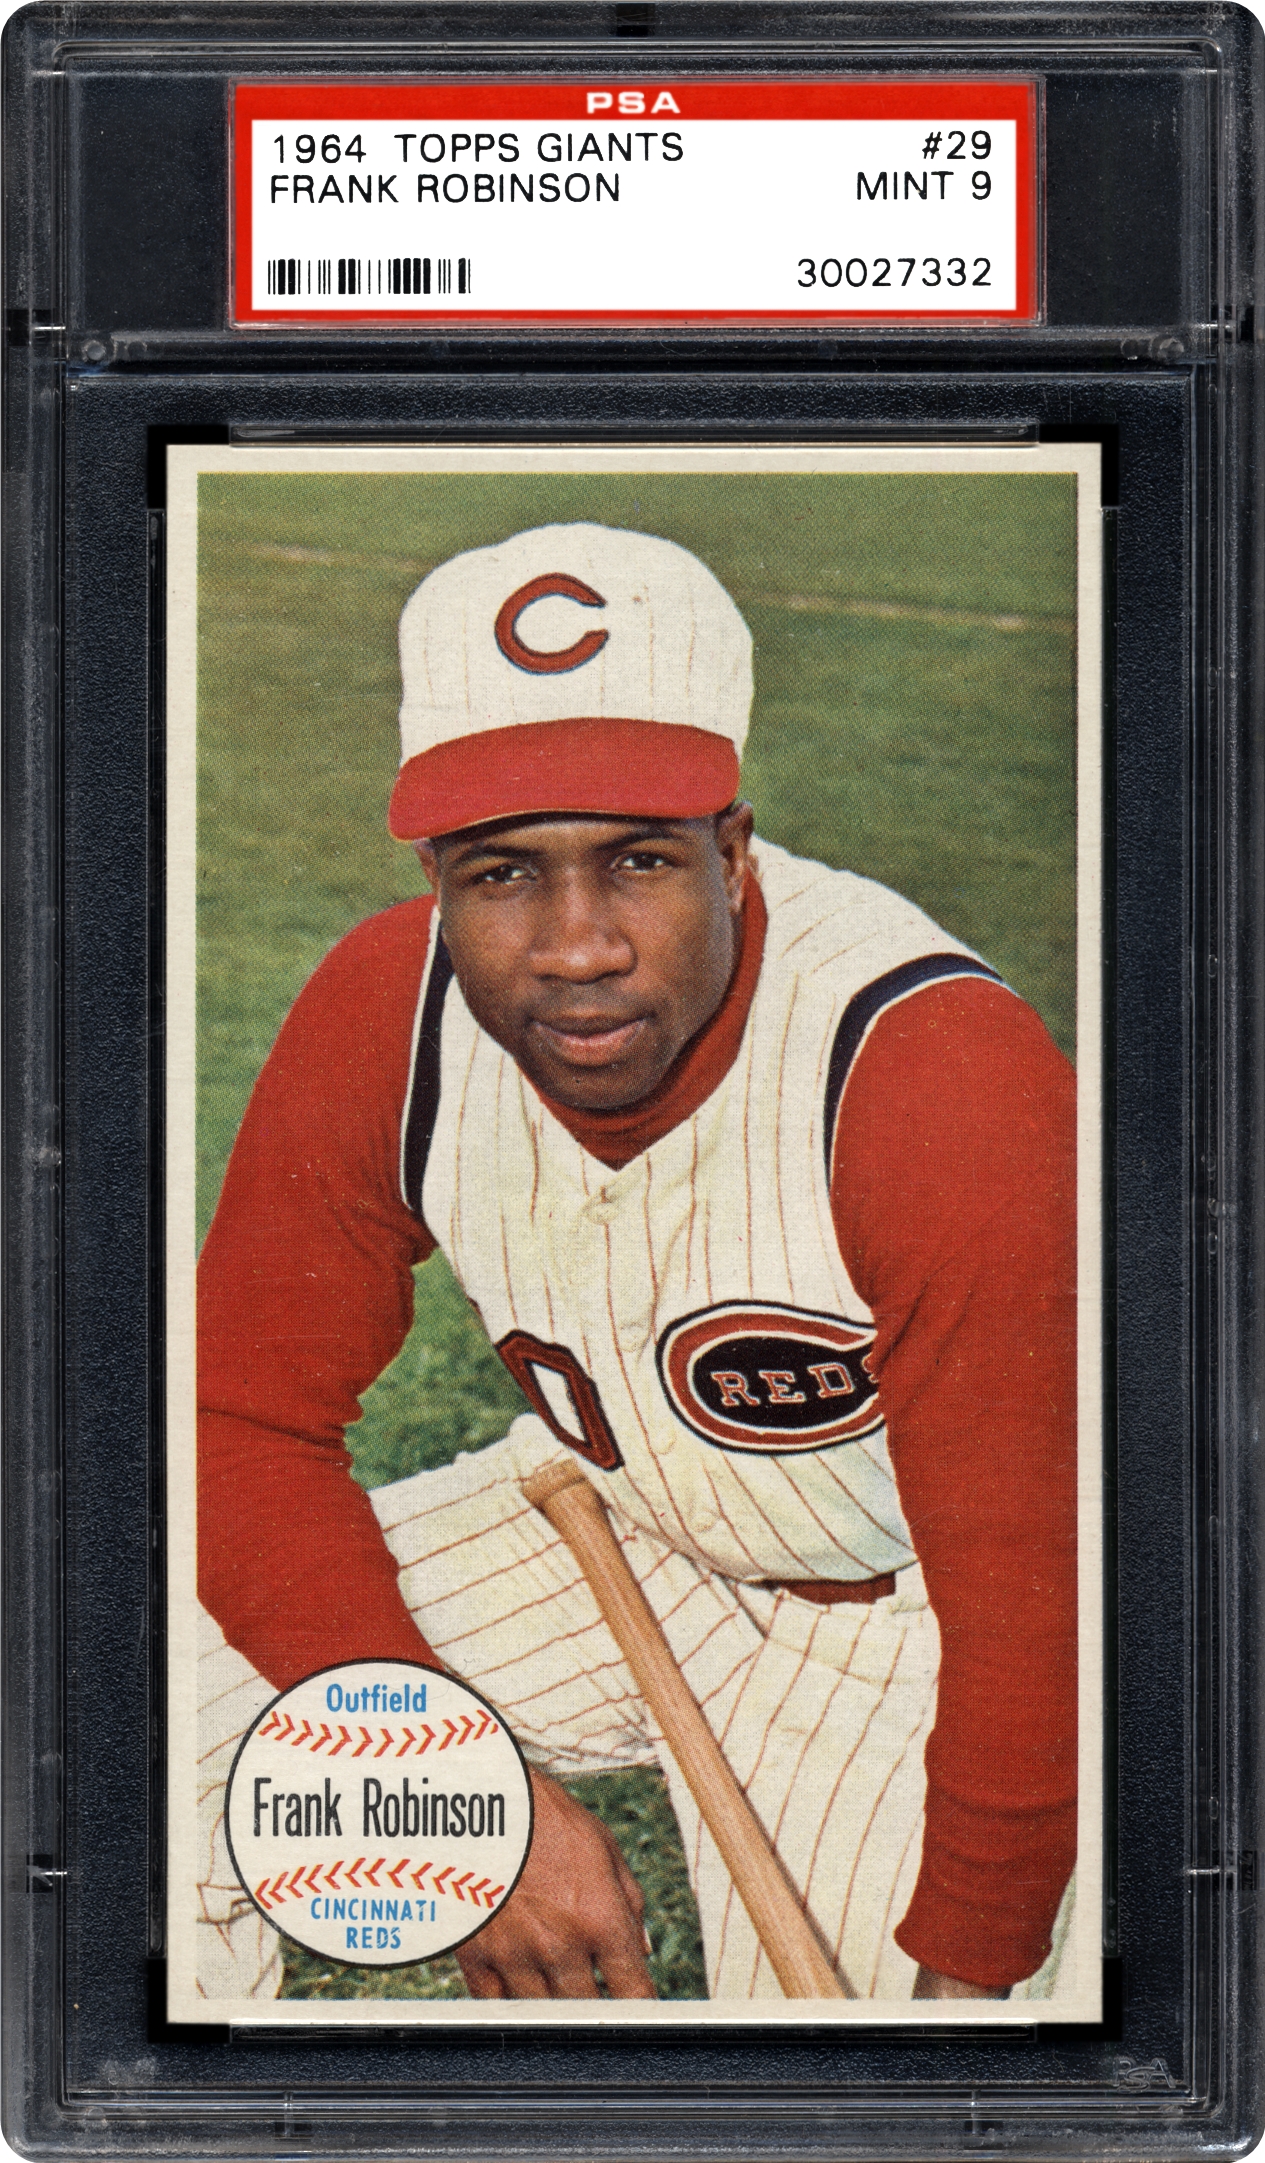 1964 Topps Giants Frank Robinson | PSA CardFacts™